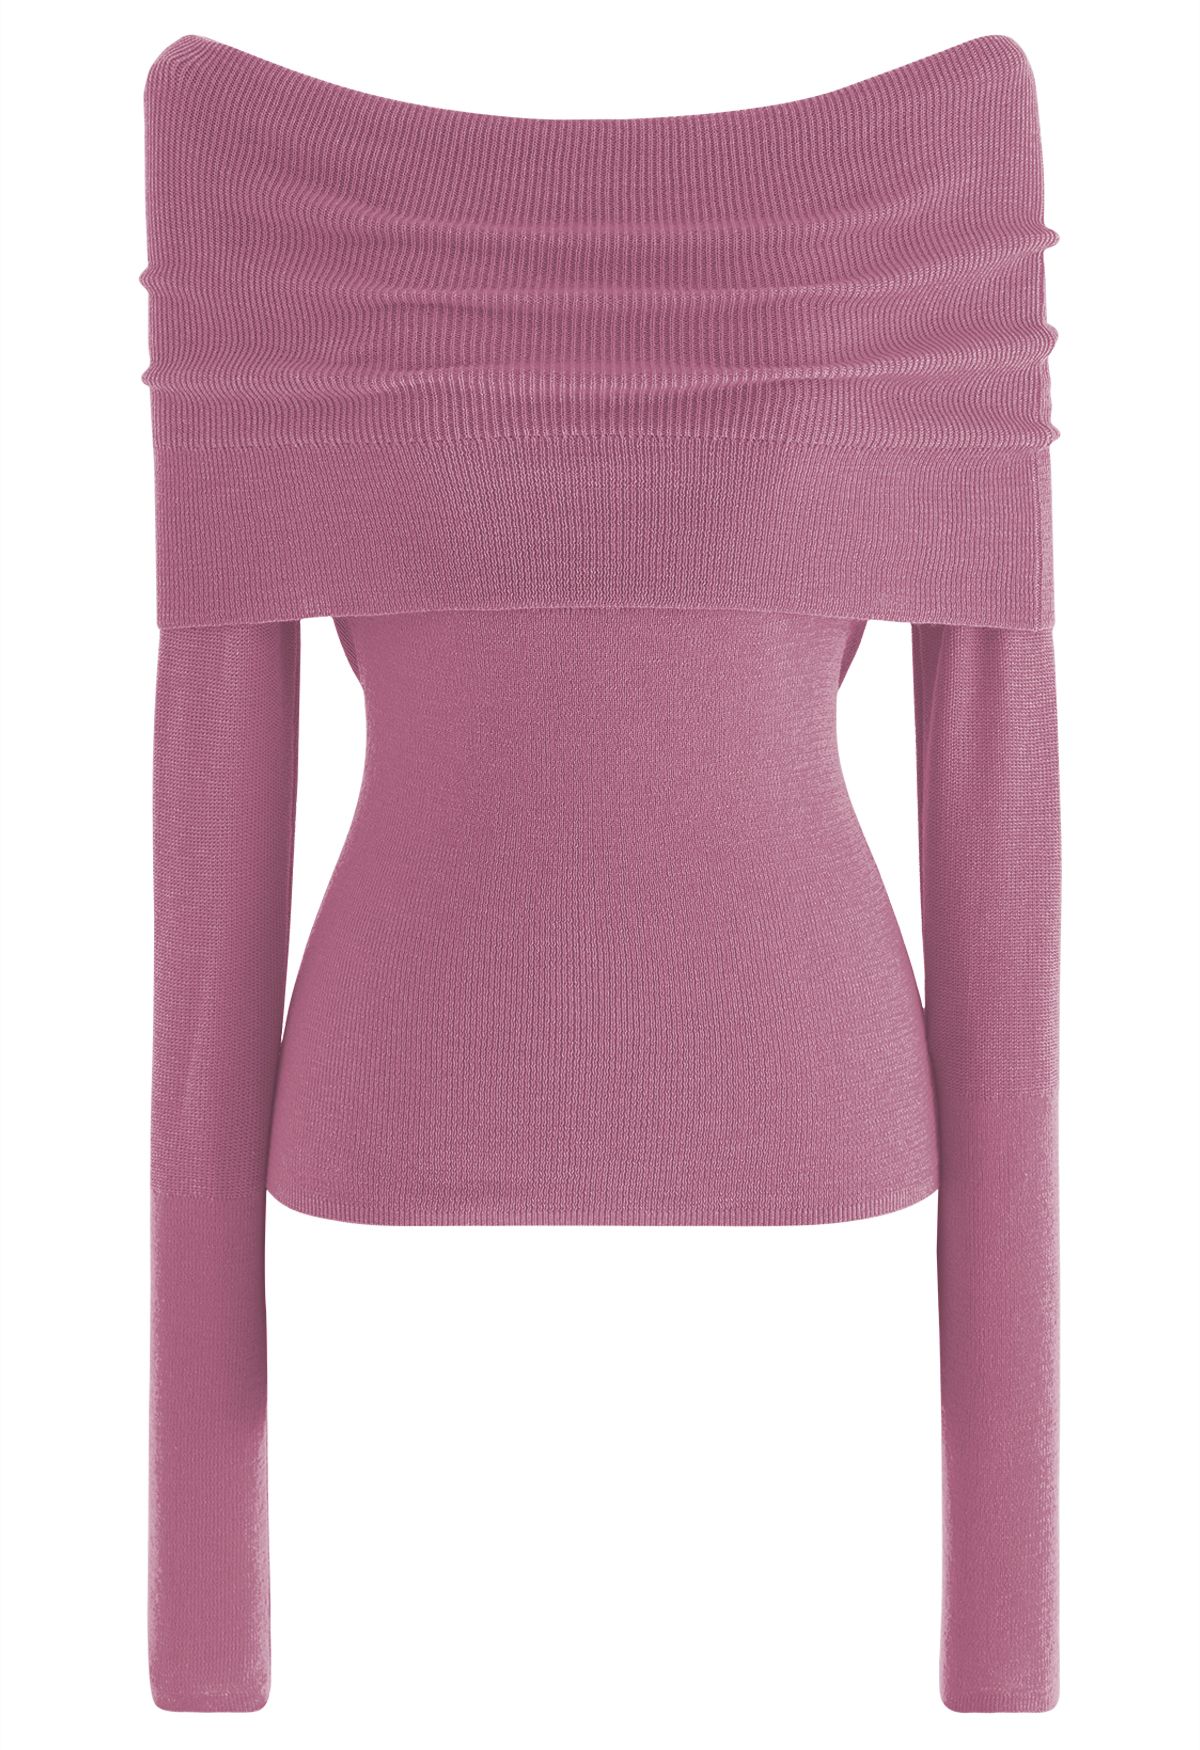 Fold Over Off-Shoulder Knit Top in Pink - Retro, Indie and Unique Fashion